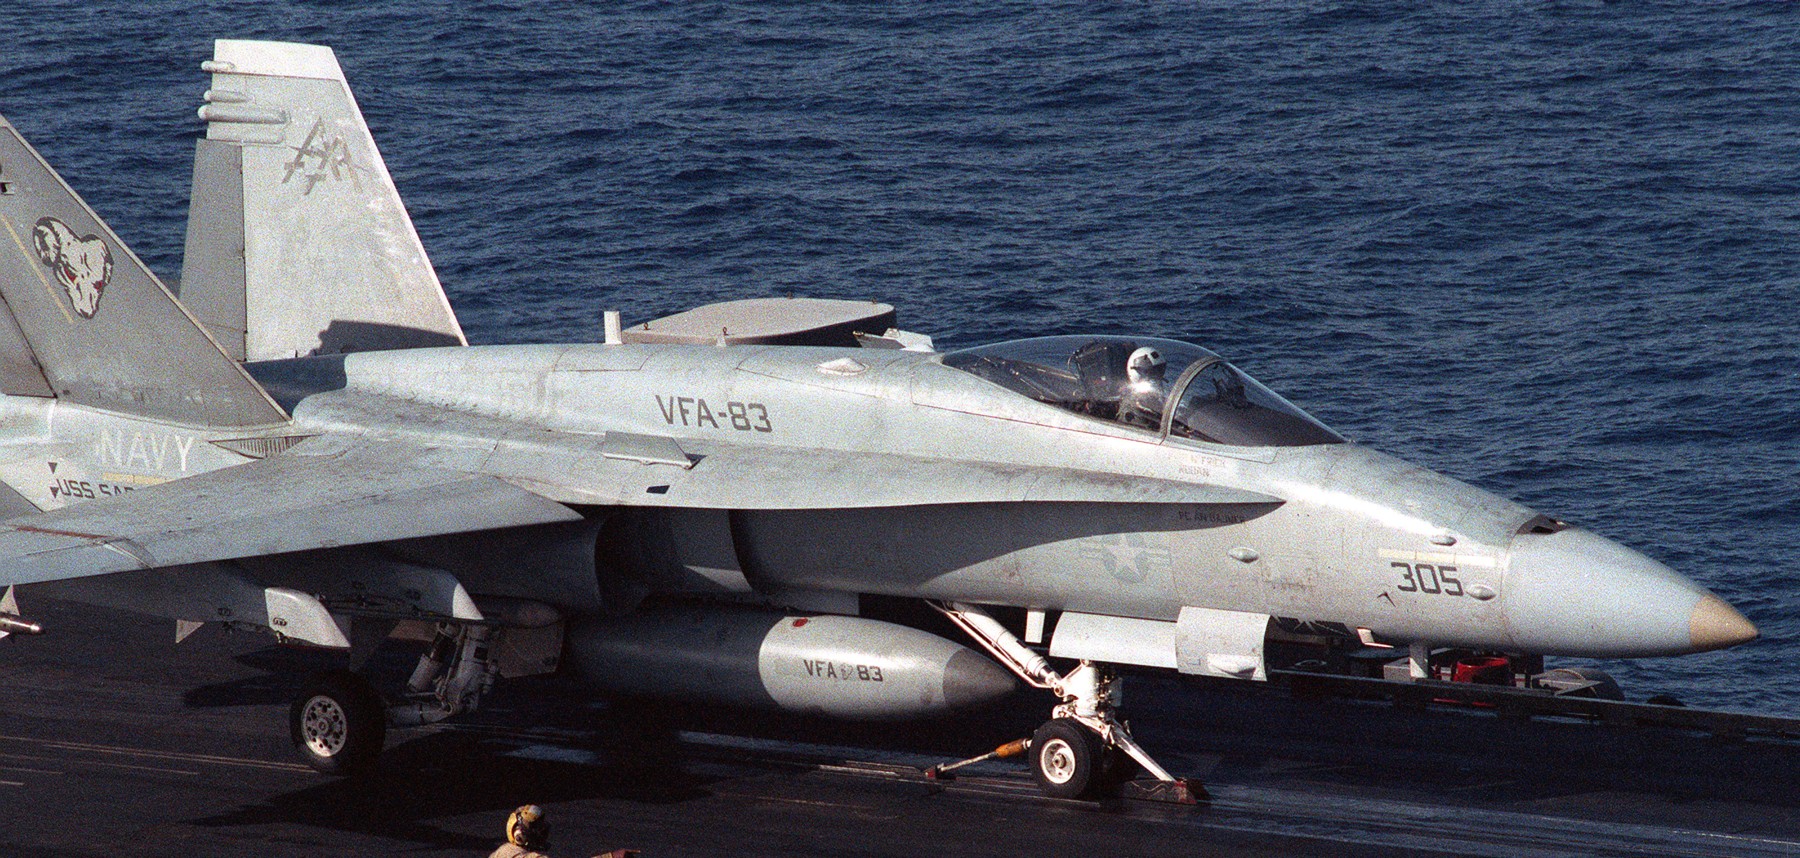 vfa-83 rampagers strike fighter squadron f/a-18c hornet cvw-17 uss saratoga cv-60 154